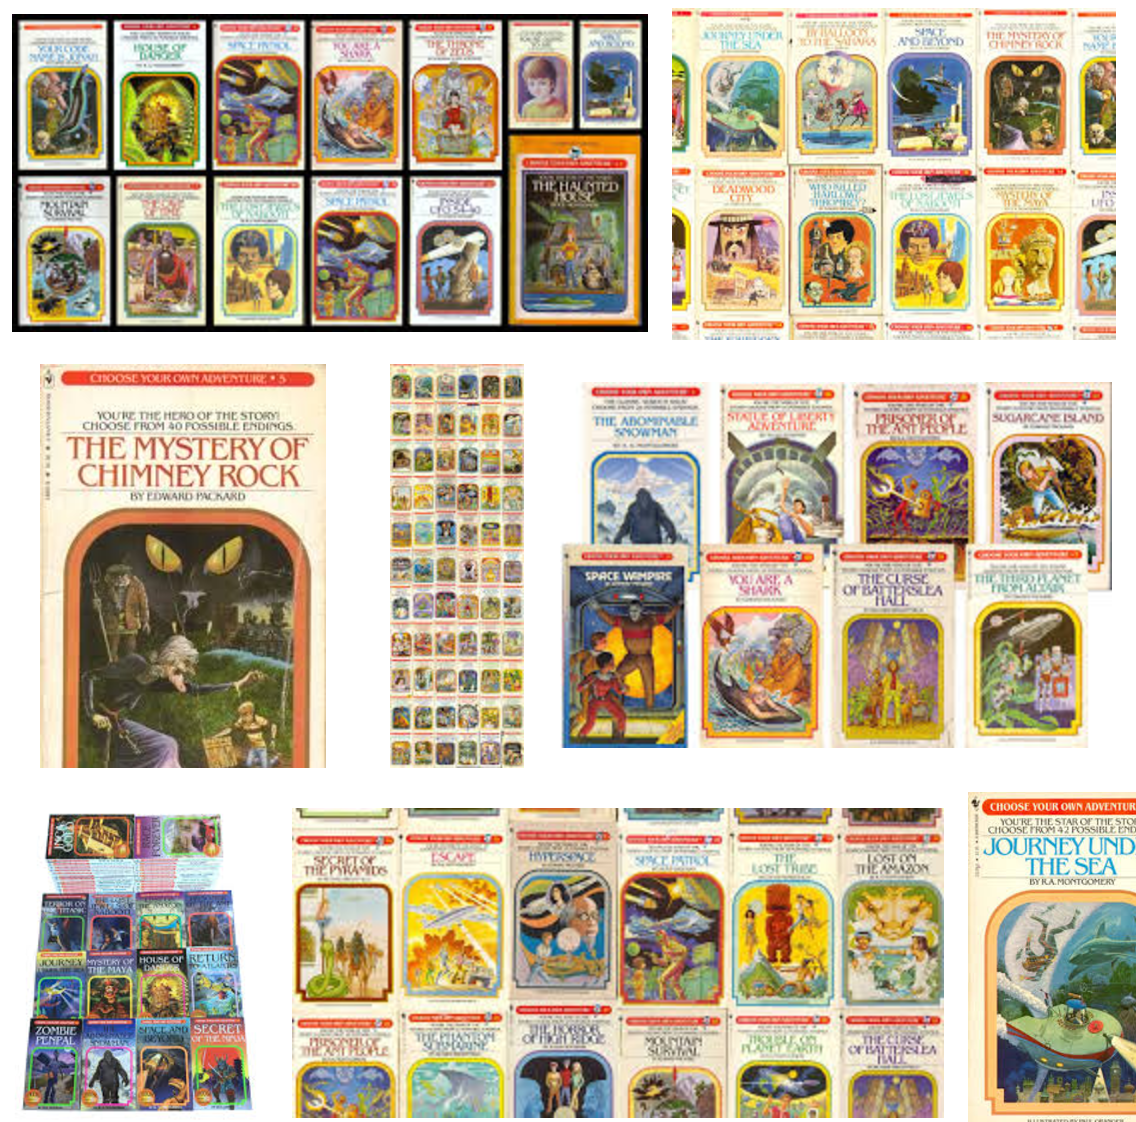 Image of a selection of choose-your-own-adventure books